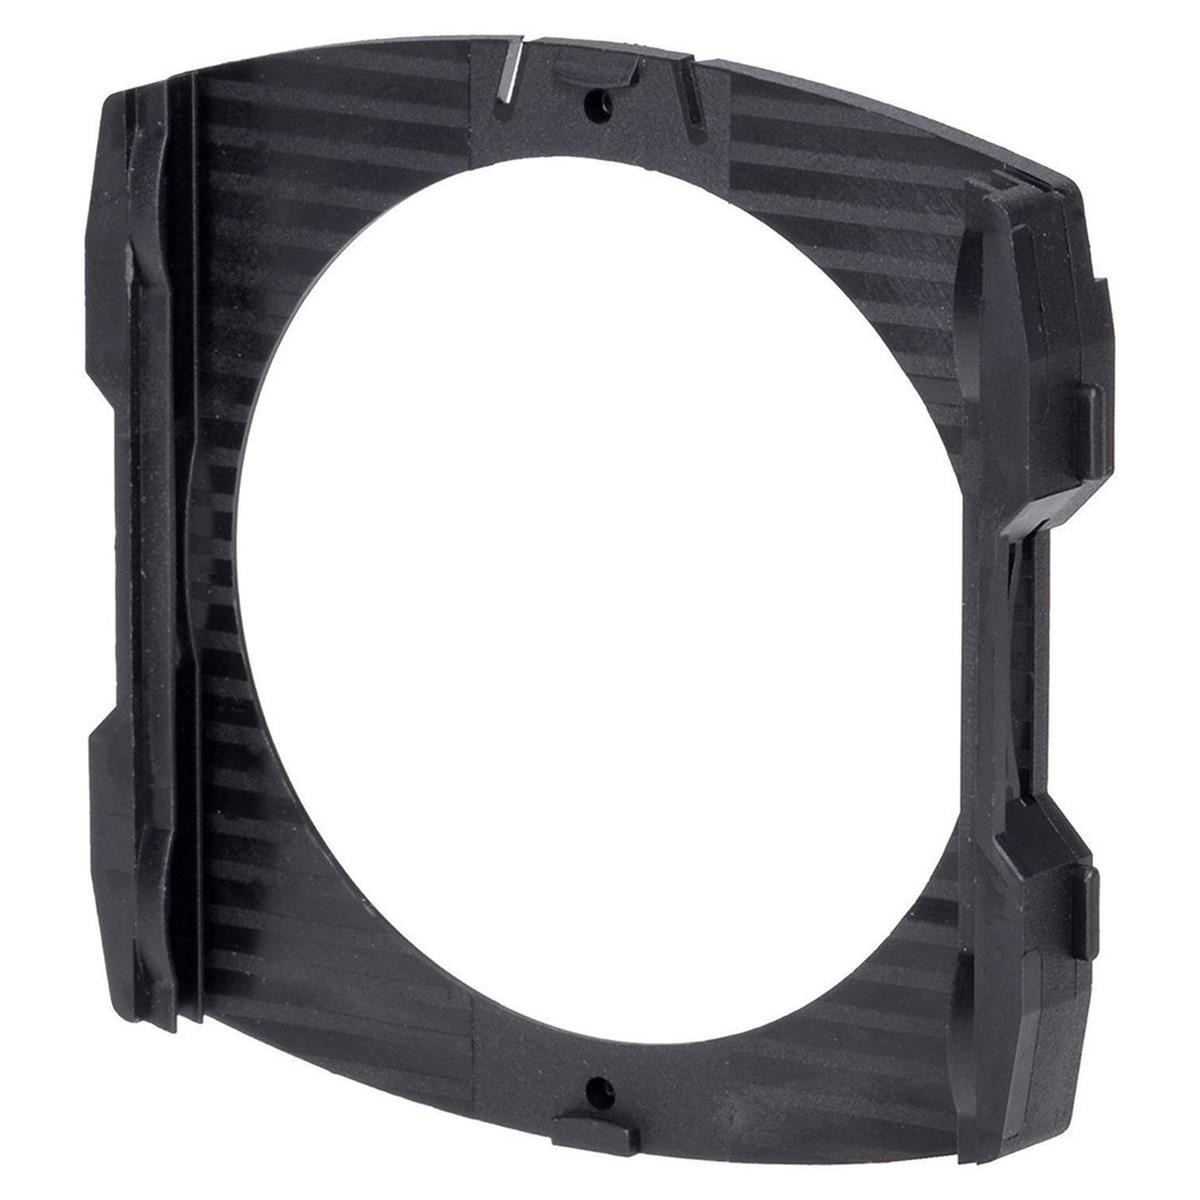 Image of Cokin Wide-Angle Slim Filter Holder for P Series Filters (48 - 82mm lenses)